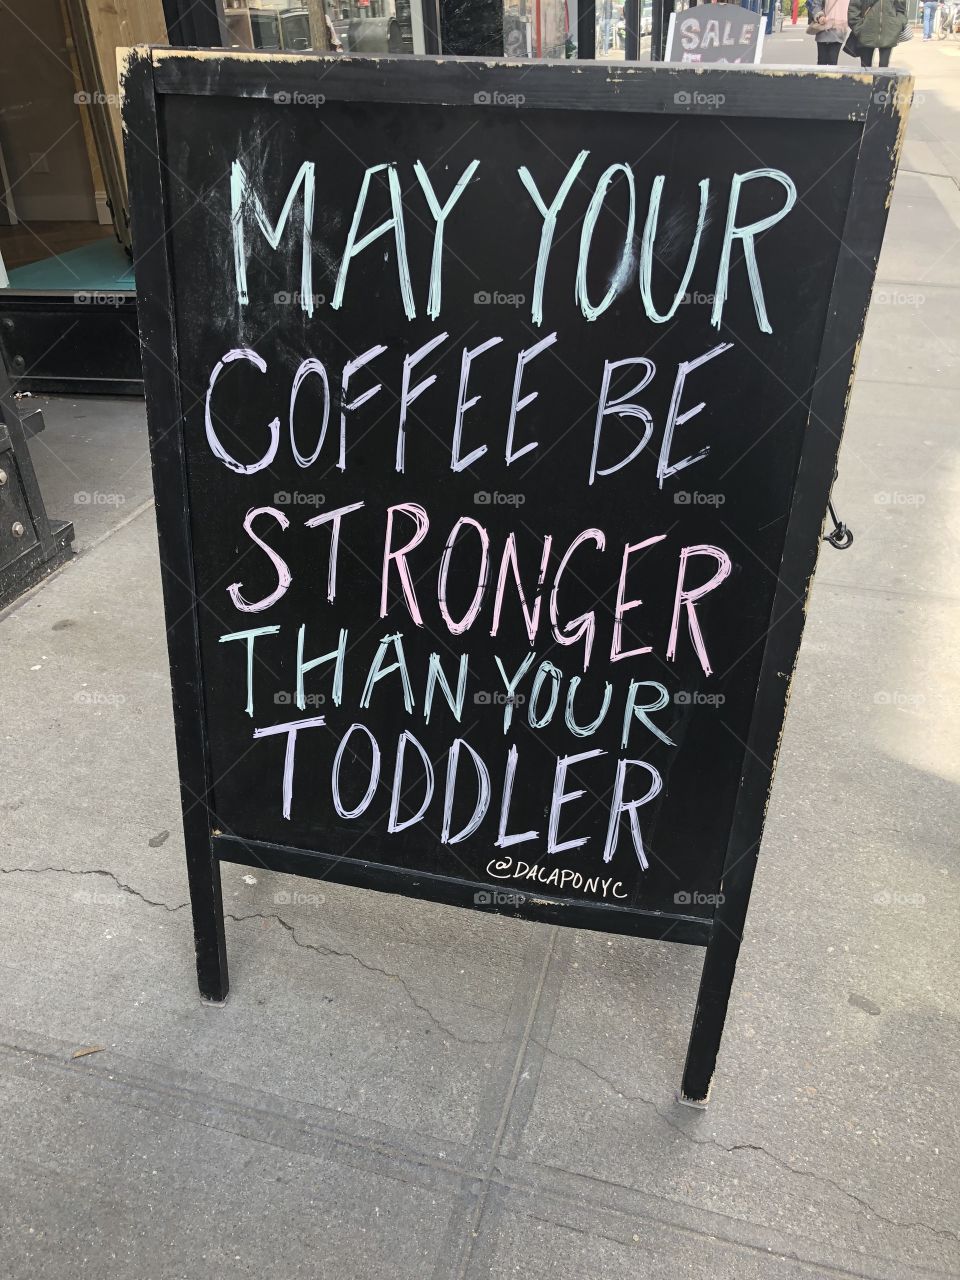 NYC street signs - “May your coffee be stronger than your toddler.” #truth 